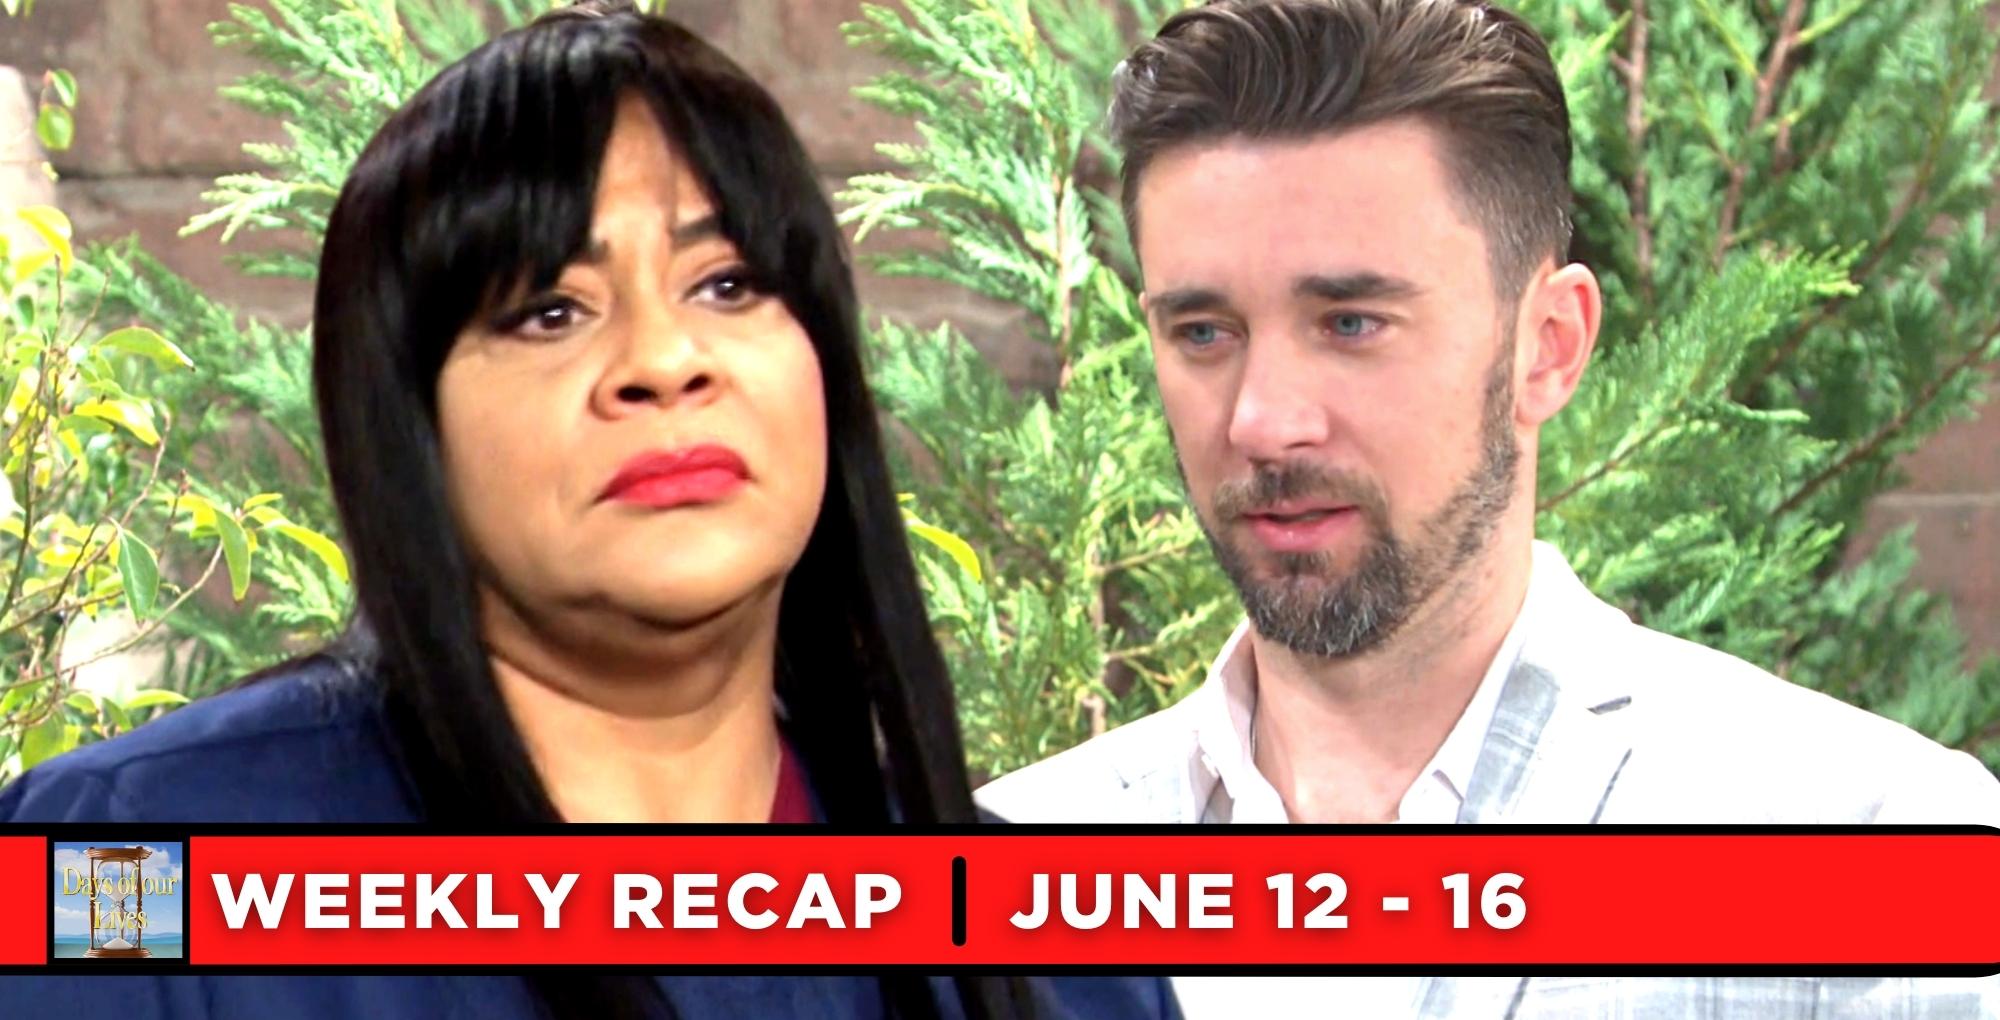 days of our lives recaps for june 12 – june 16, 2023, whitley and chad.